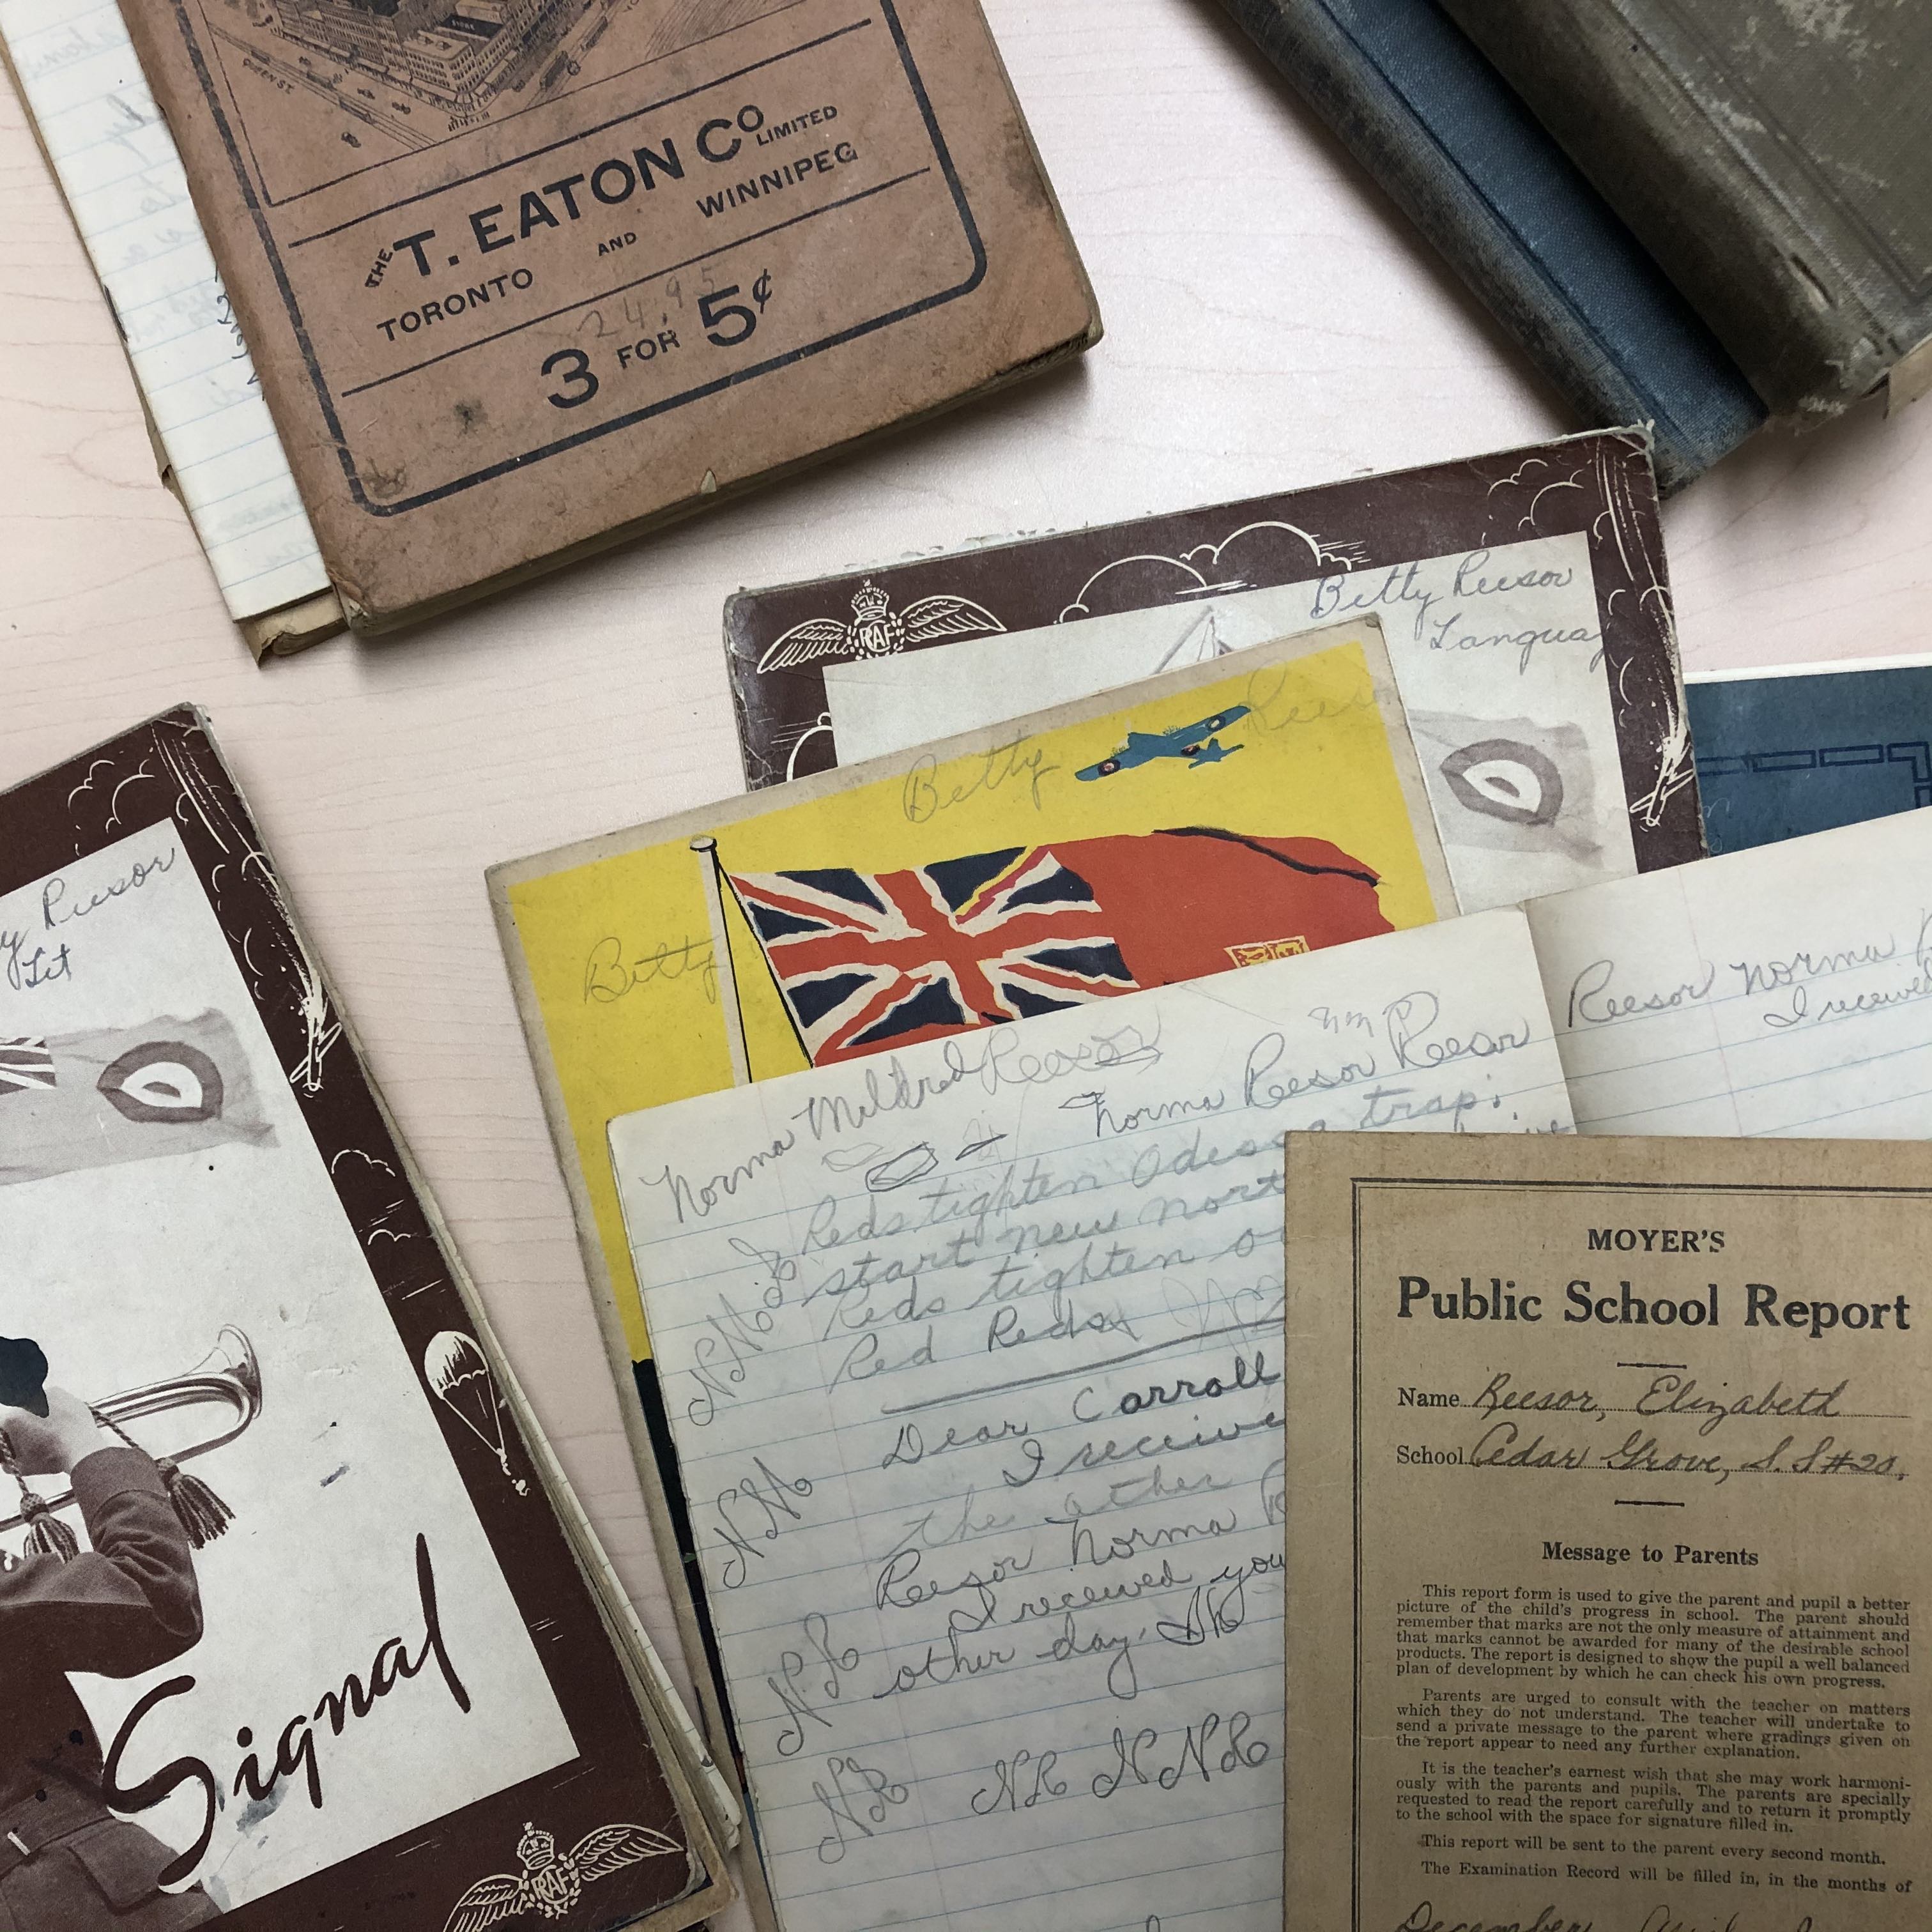 Archival Collection of schoolbooks and notes. YRDSB Museum & Archives, 015.21.0